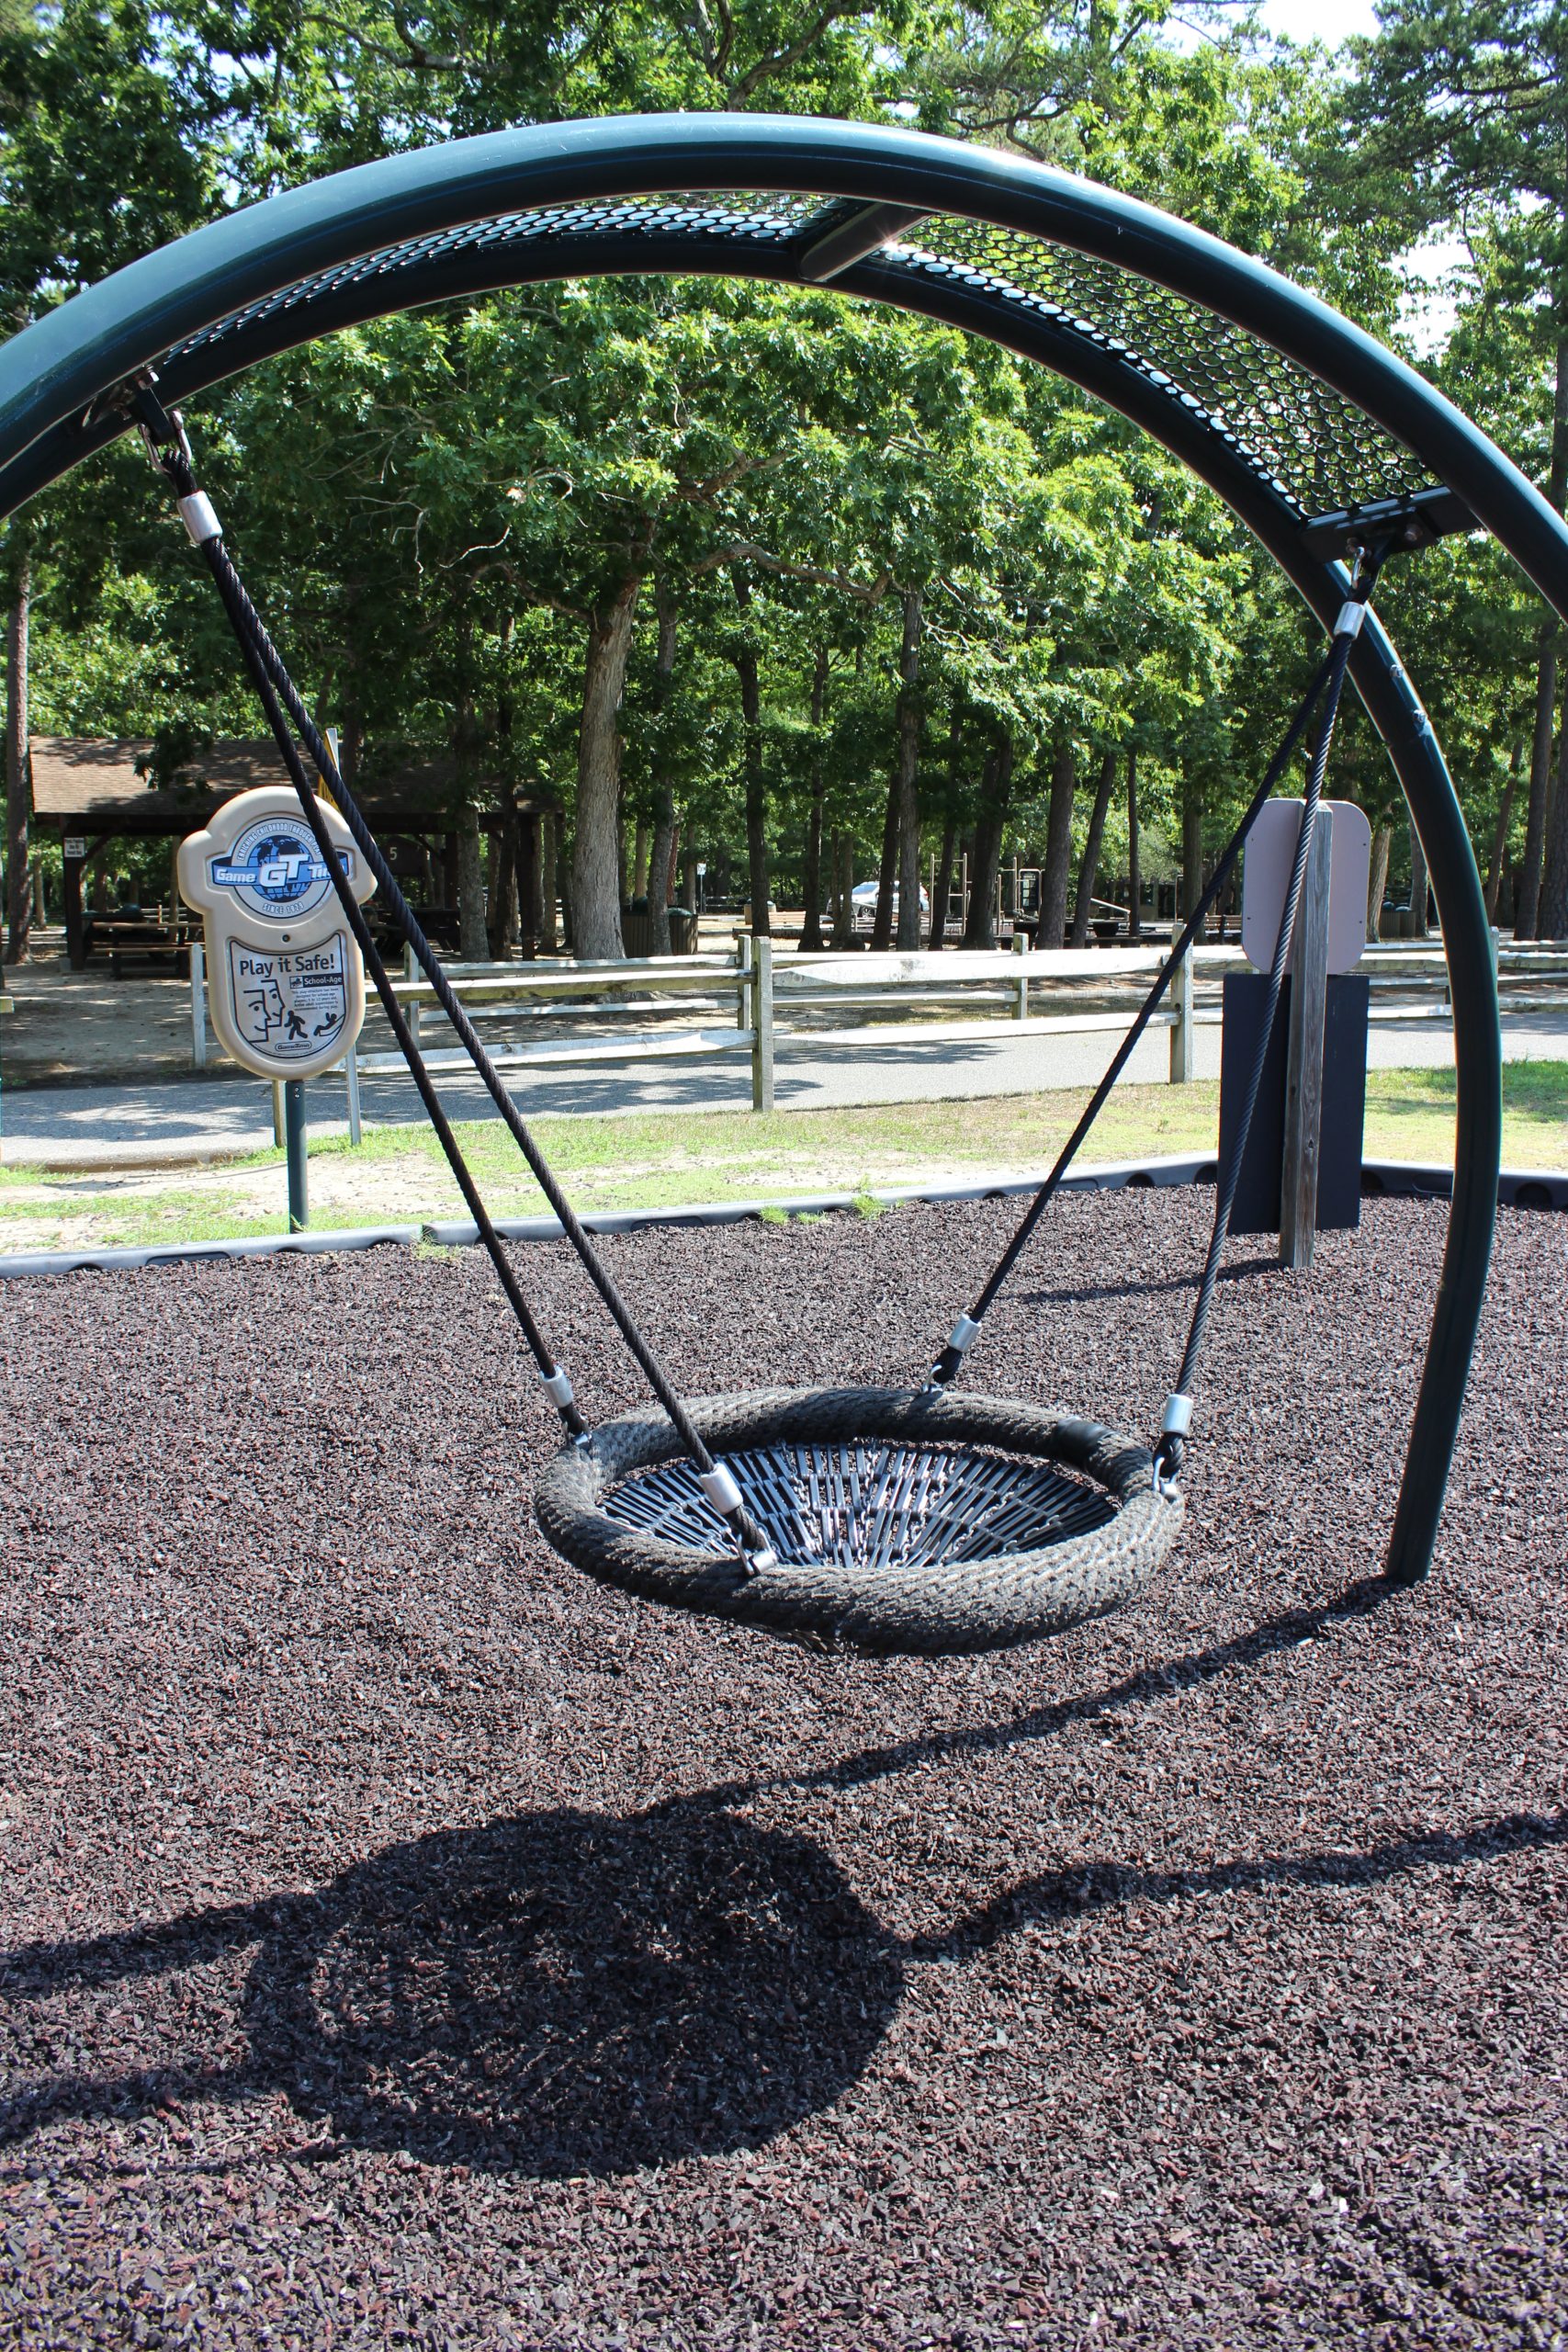 SWINGS - basket swing TALL at Cape May County Zoo Park Playground in Cape May Court House NJ